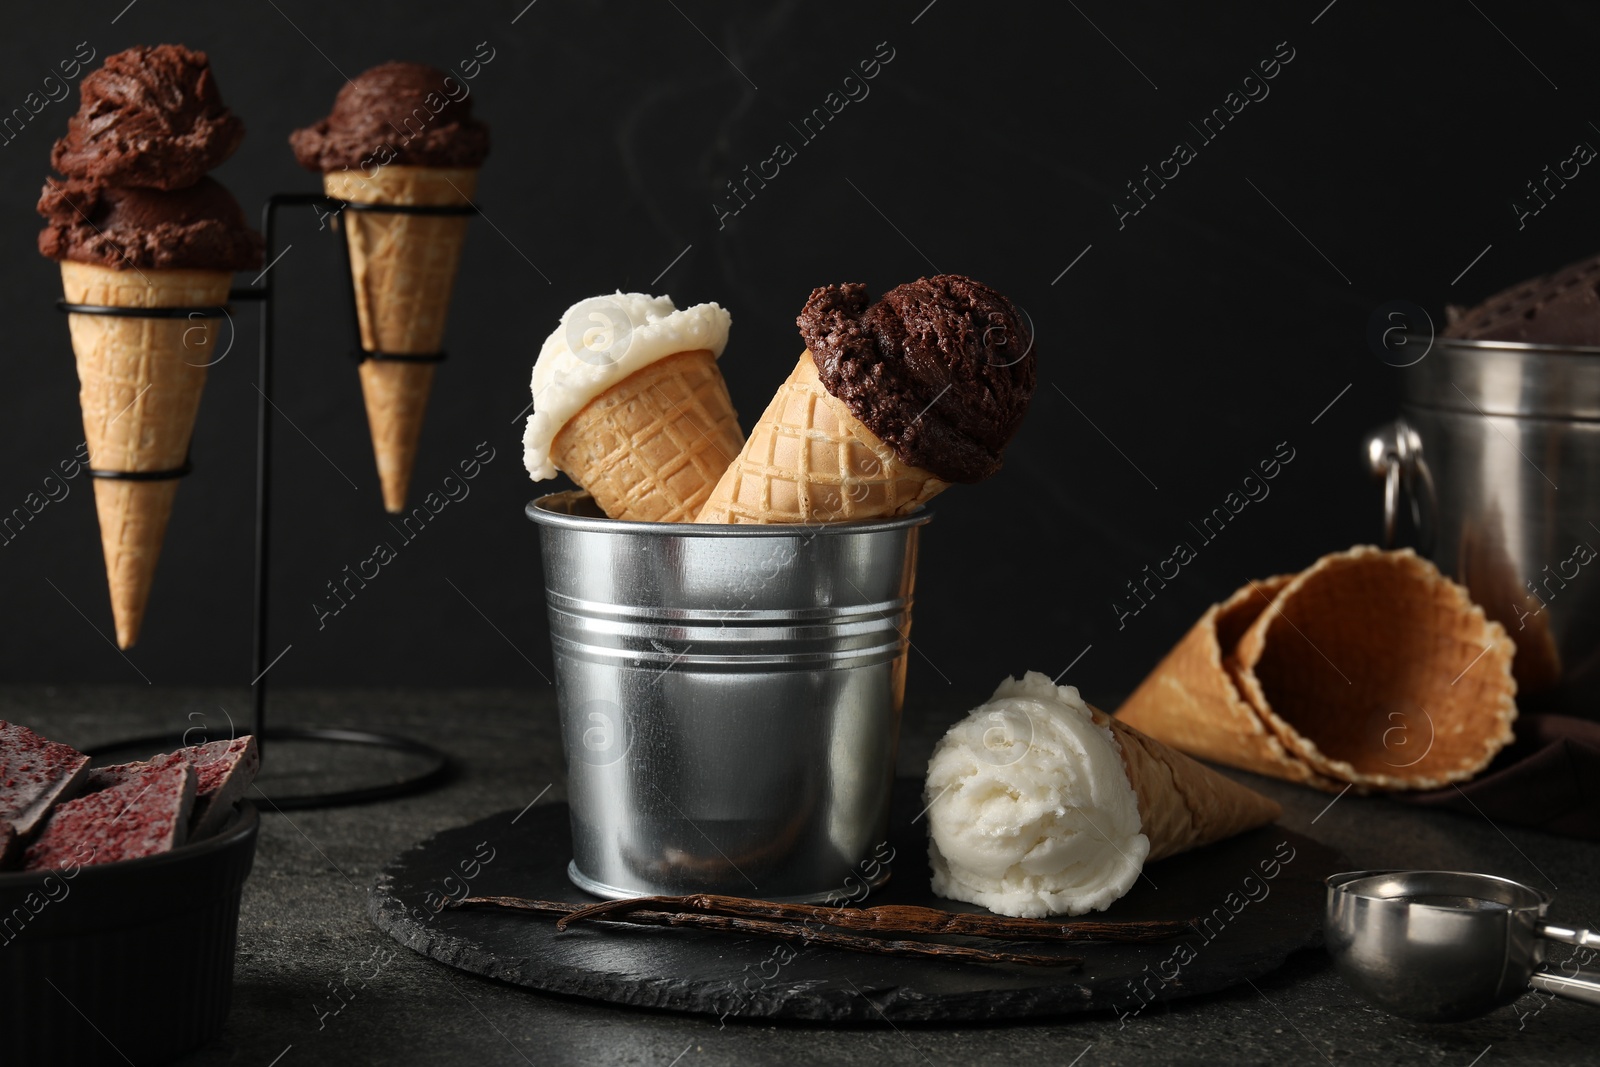 Photo of Ice cream scoops in wafer cones on gray textured table